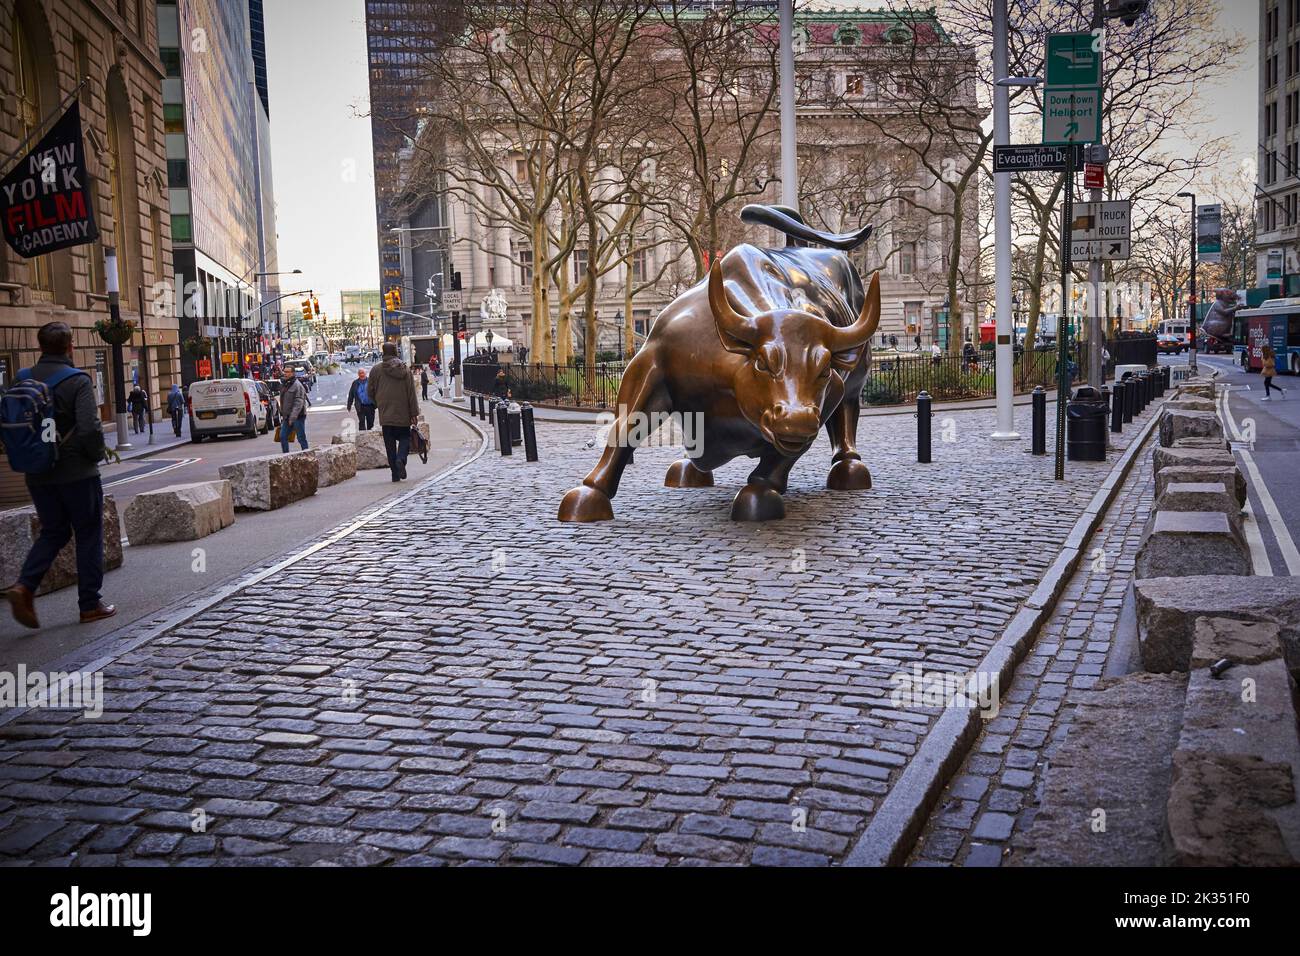 Charging Bull is a popular tourist destination that draws thousands of people, symbolizing Wall Street and the Financial District. Stock Photo